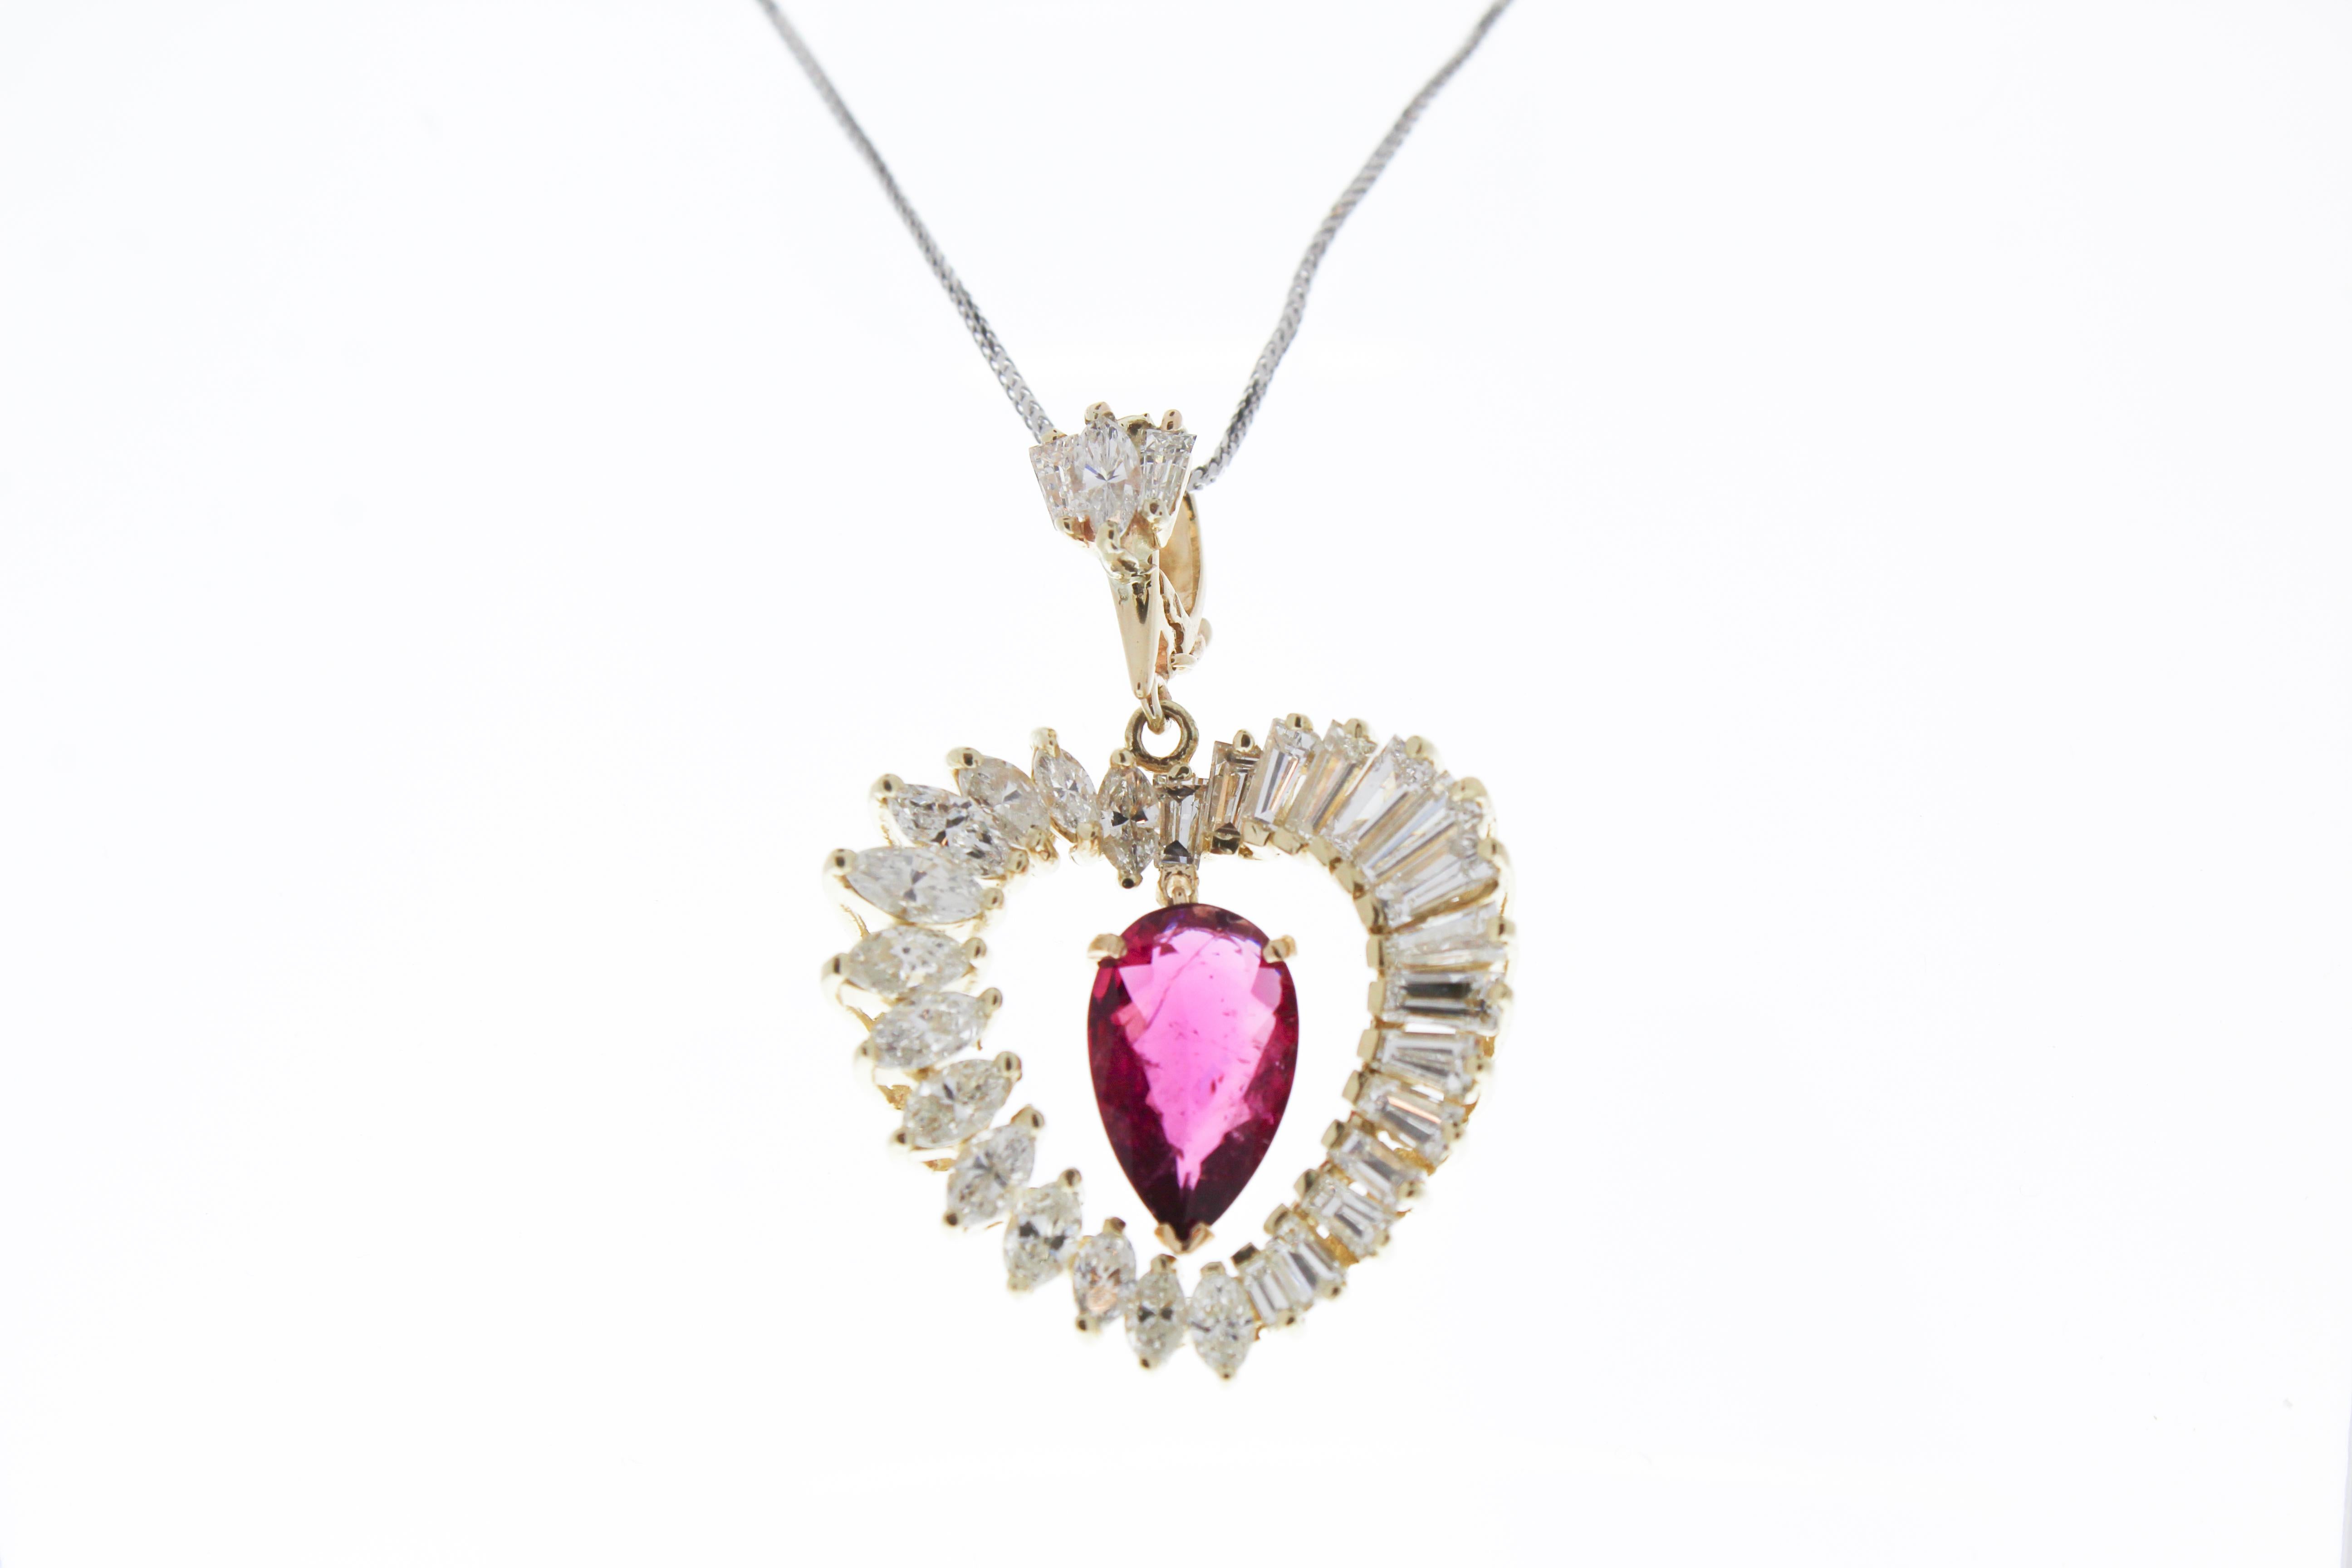 Behold the epitome of elegance and romance: our breathtaking 2.51 carat Pear-shaped Pink Rubellite and 31 Marquise Diamond Heart-shaped Pendant, meticulously crafted in radiant 14k yellow gold. At the heart of this enchanting pendant shines a